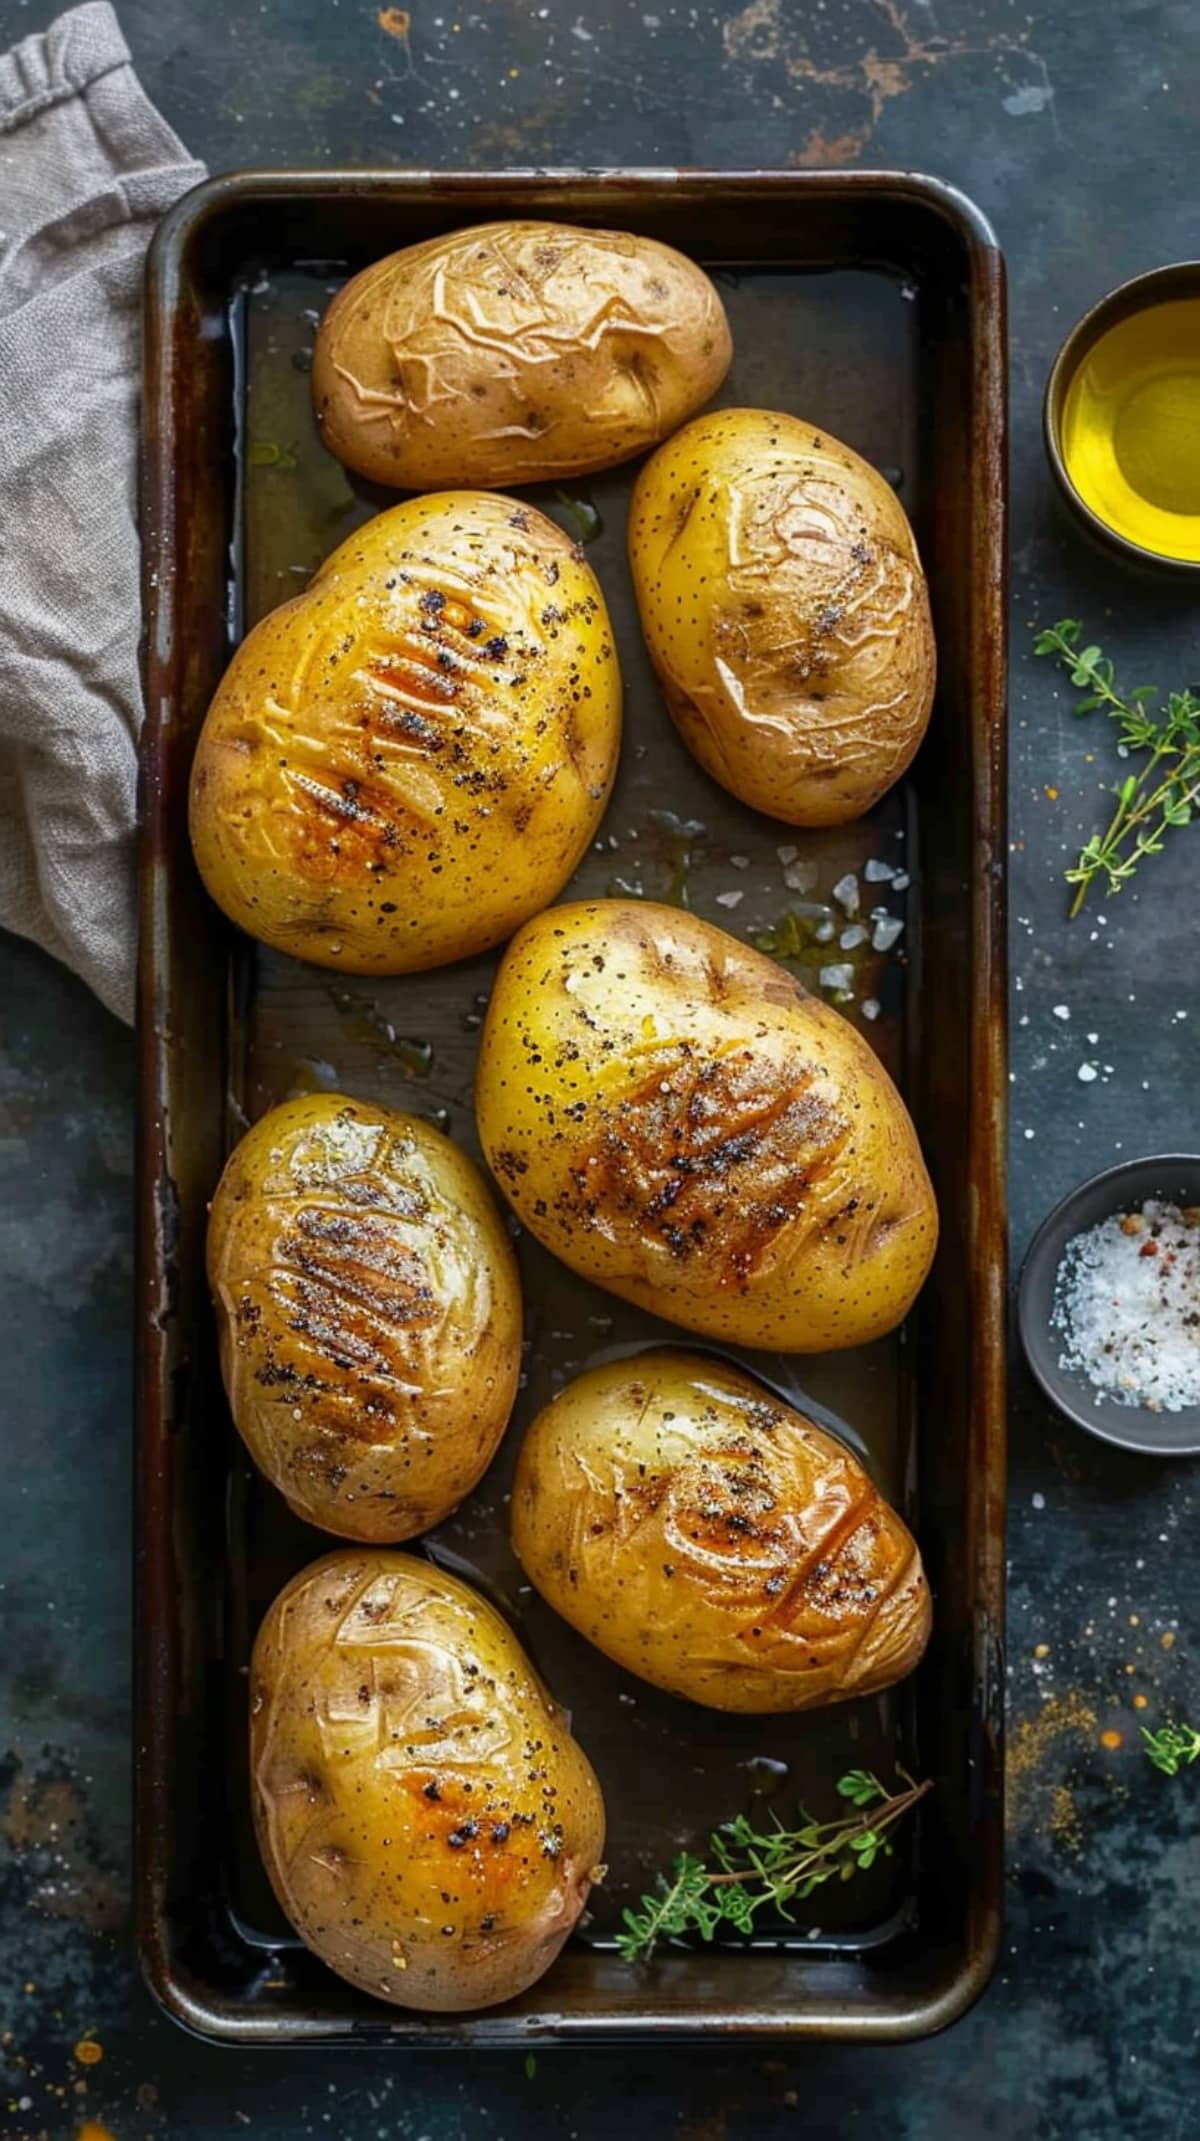 Tray of Jacket Potatoes with olive oil, salt, and pepper